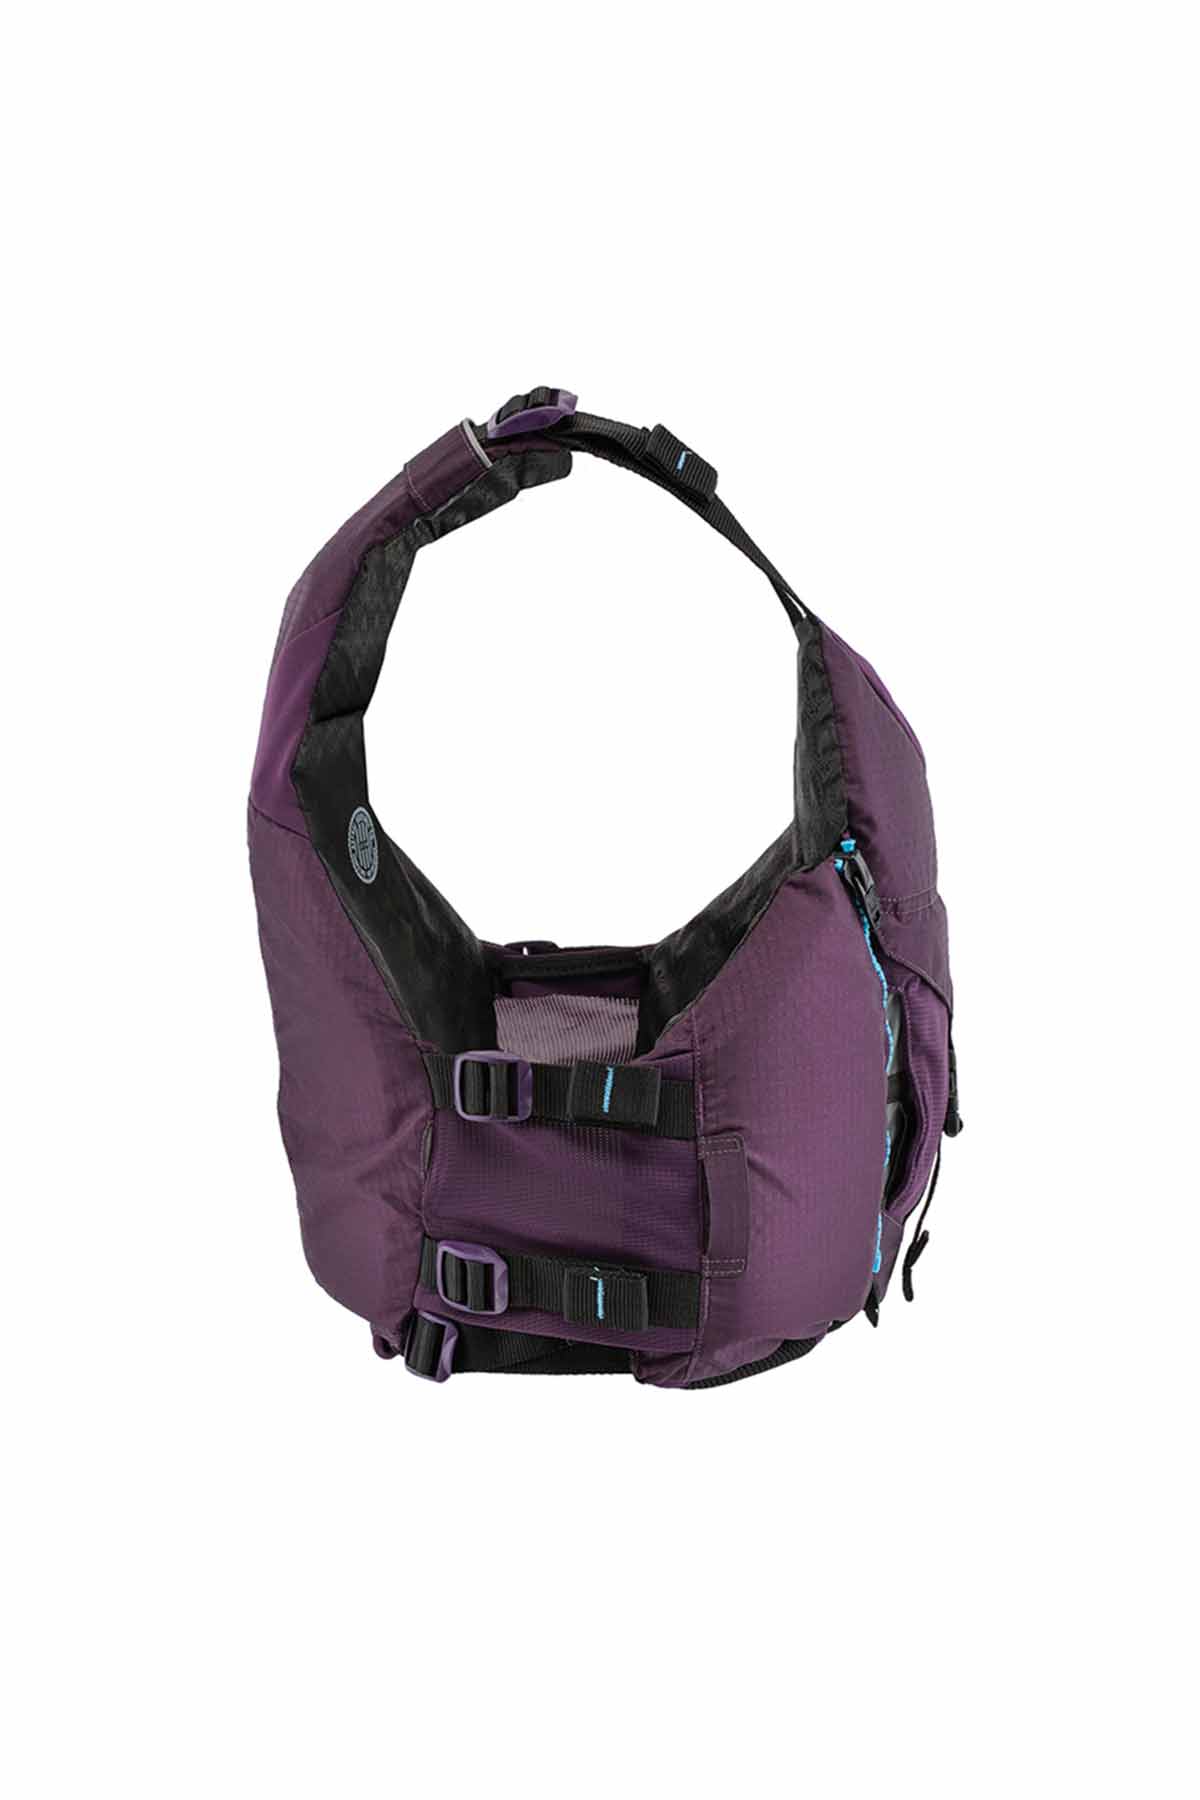 Astral Layal PFD Eggplant Side View